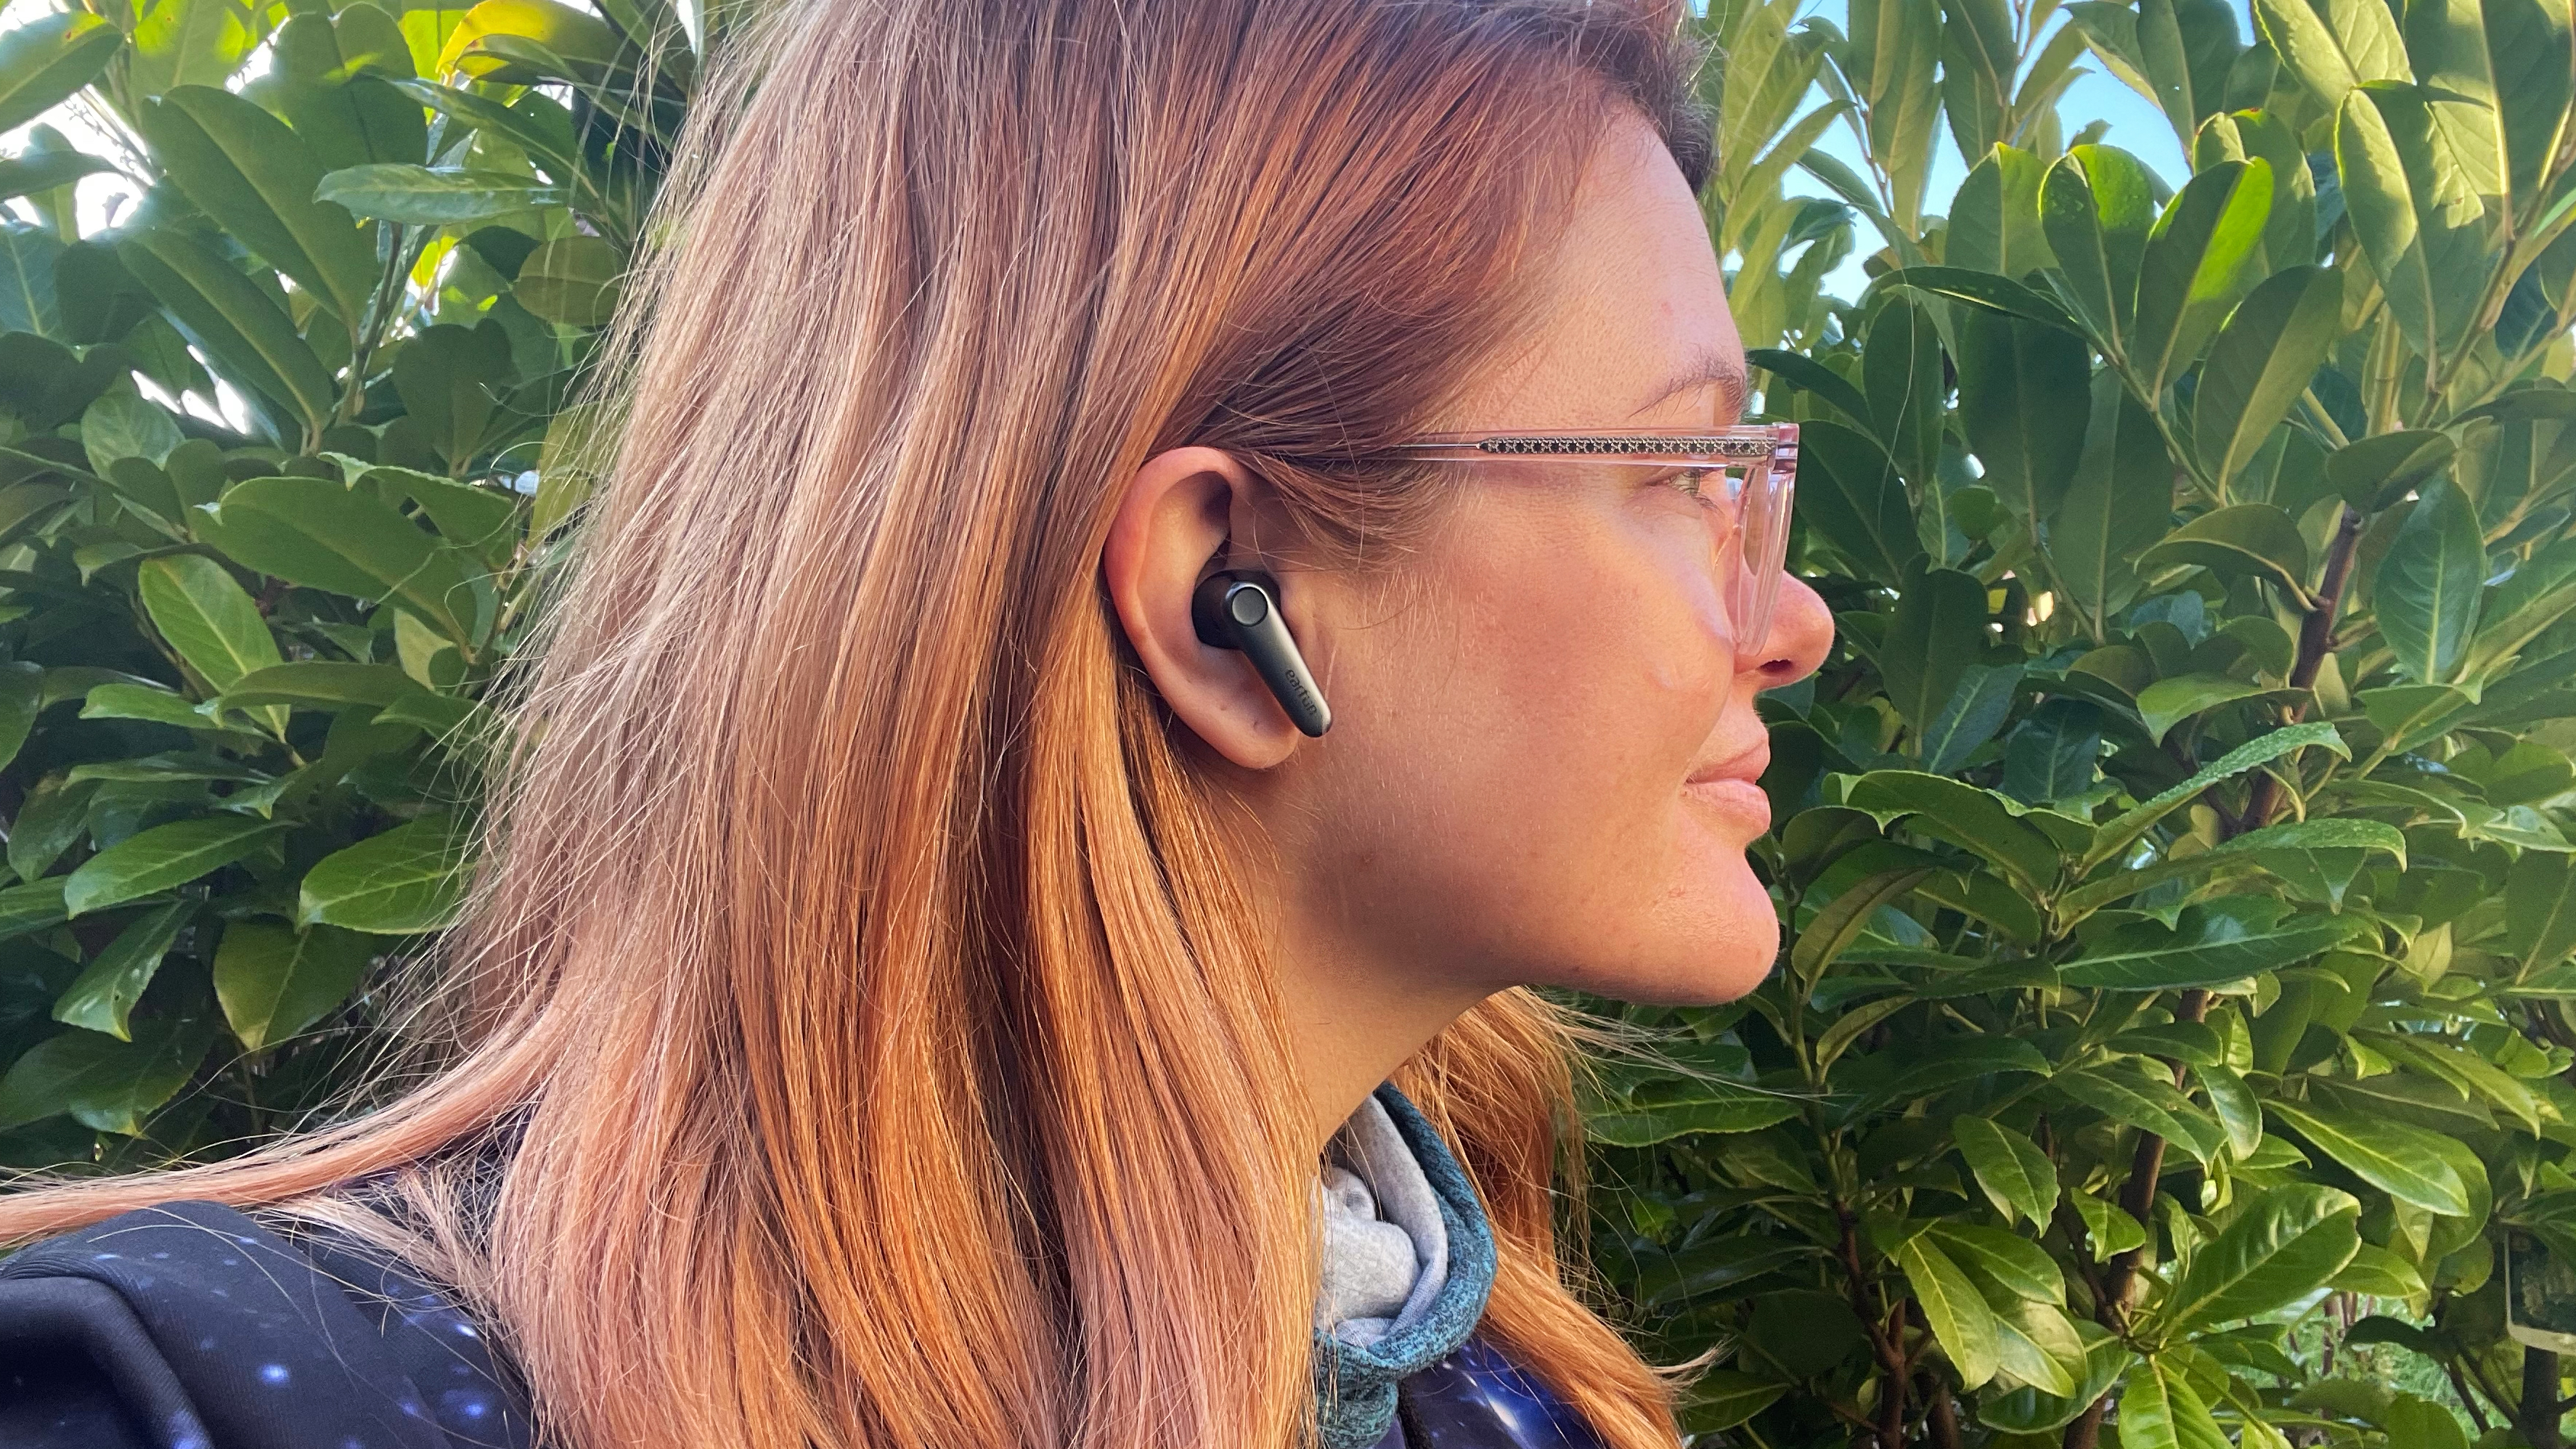 Earfun Air Pro 3 worn in the ears of a woman outdoors on wooden table